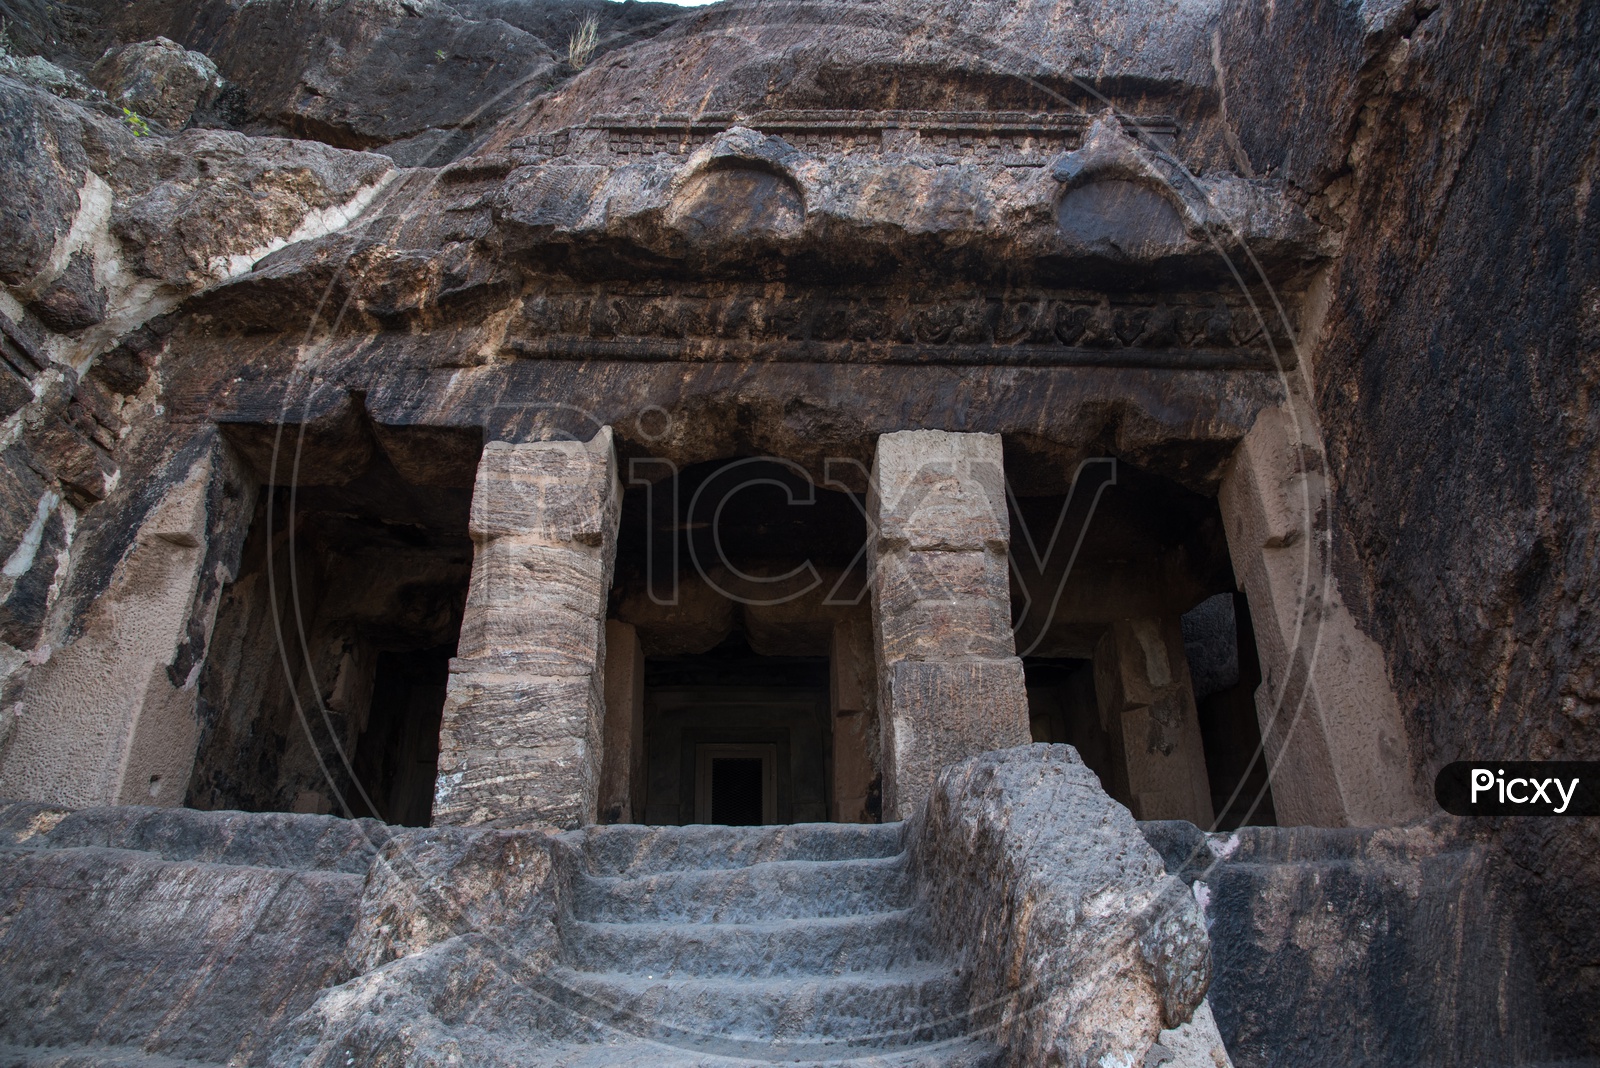 Entrance/Steps to Second story of Undavalli caves